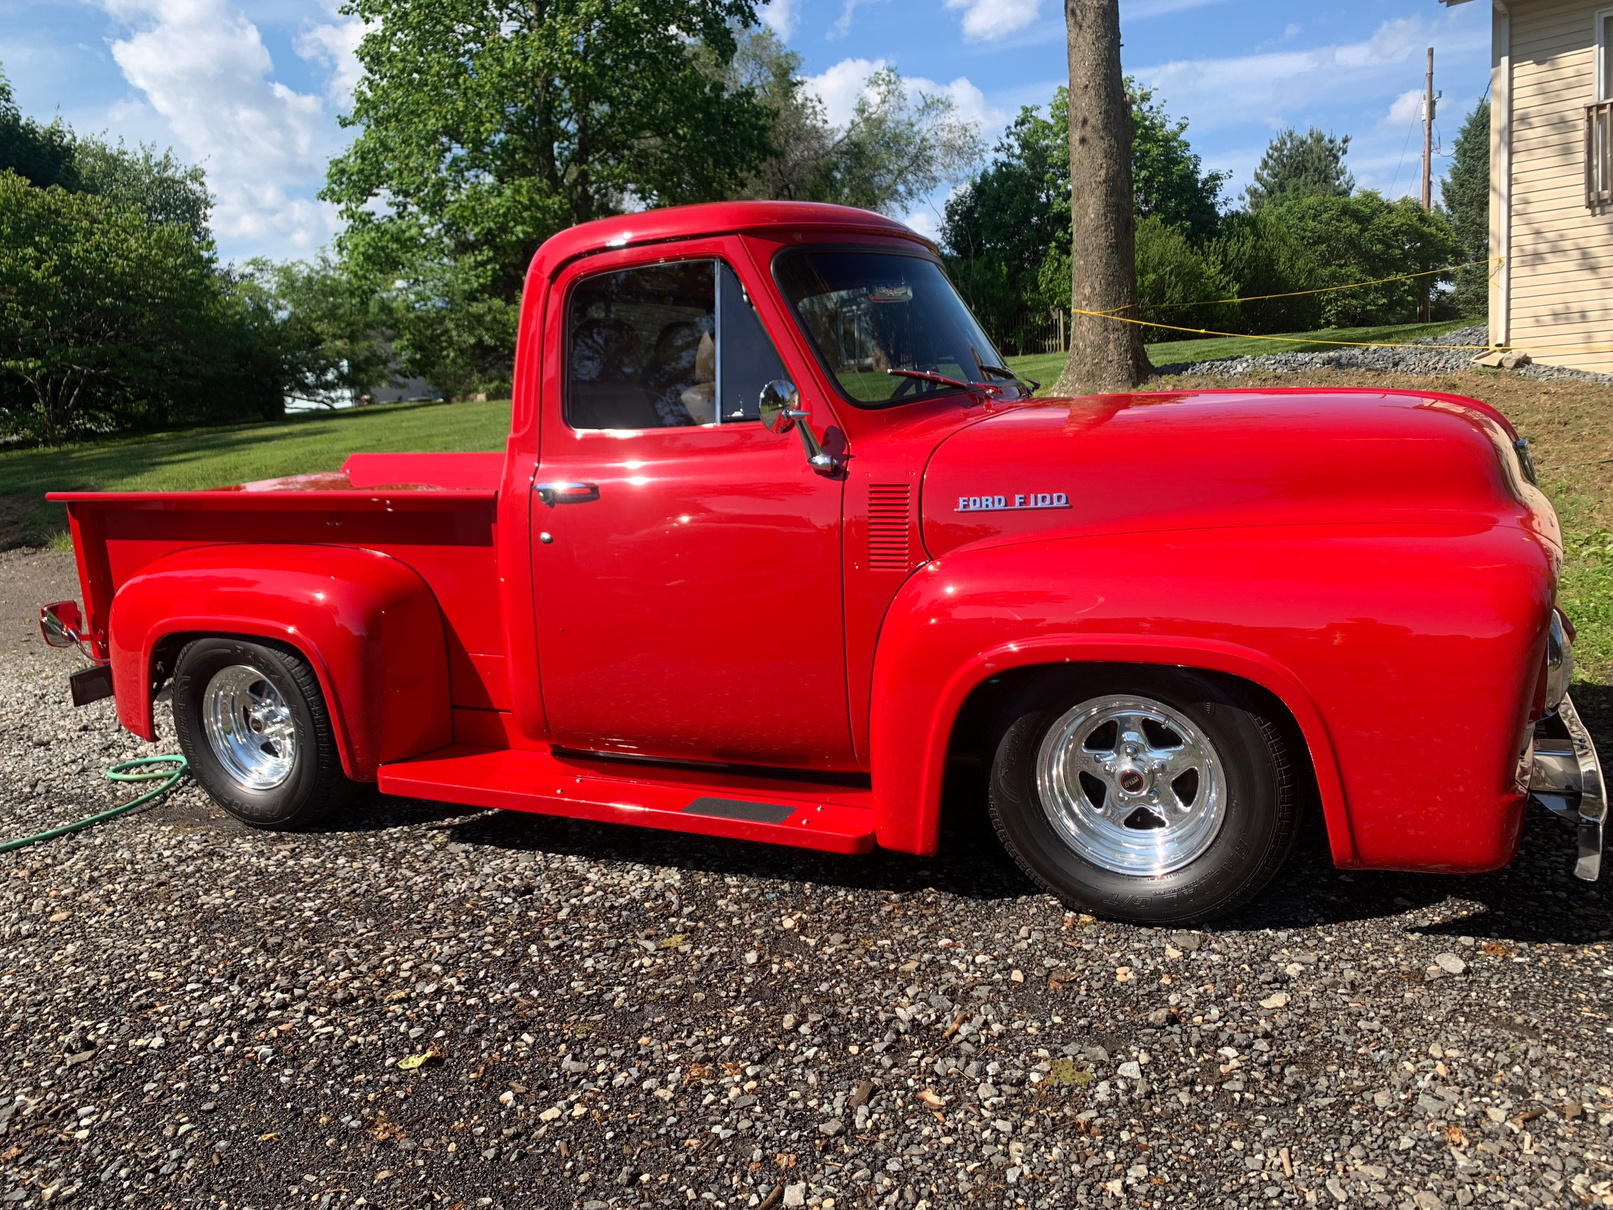 This old school Ford F-100 received a premium exterior detail.